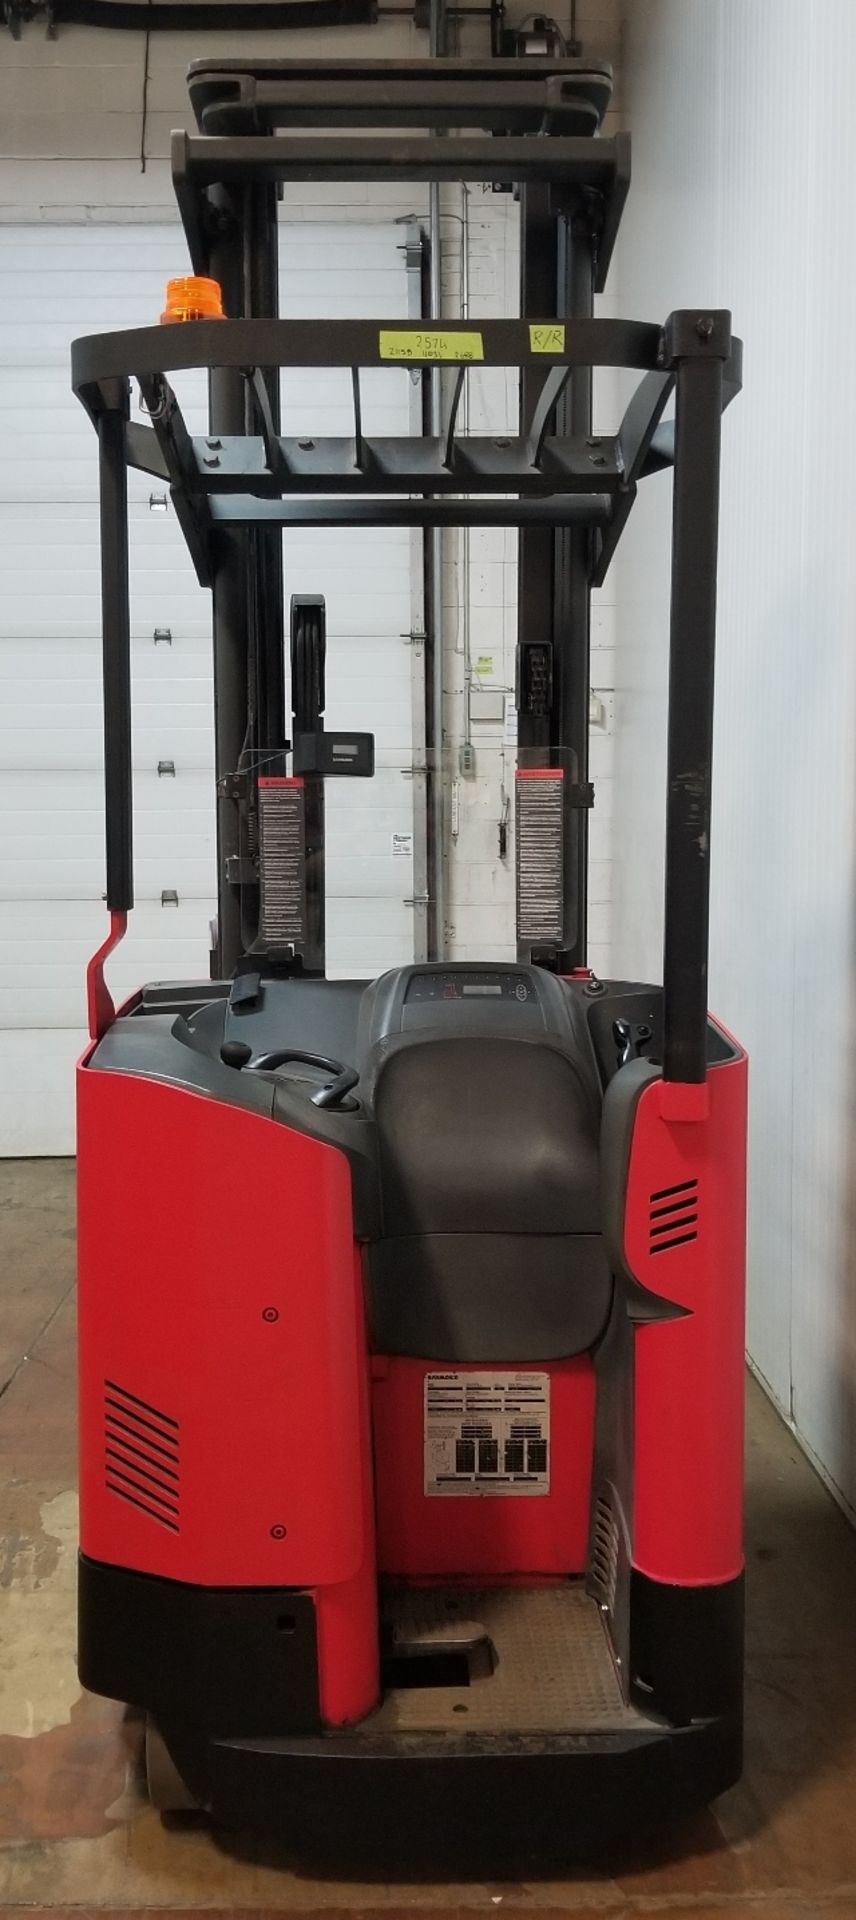 RAYMOND (2006) 740-R35TT 36V ELECTRIC REACH TRUCK WITH 3500 LB. CAPACITY, 271" MAX. VERTICAL LIFT, - Image 4 of 8